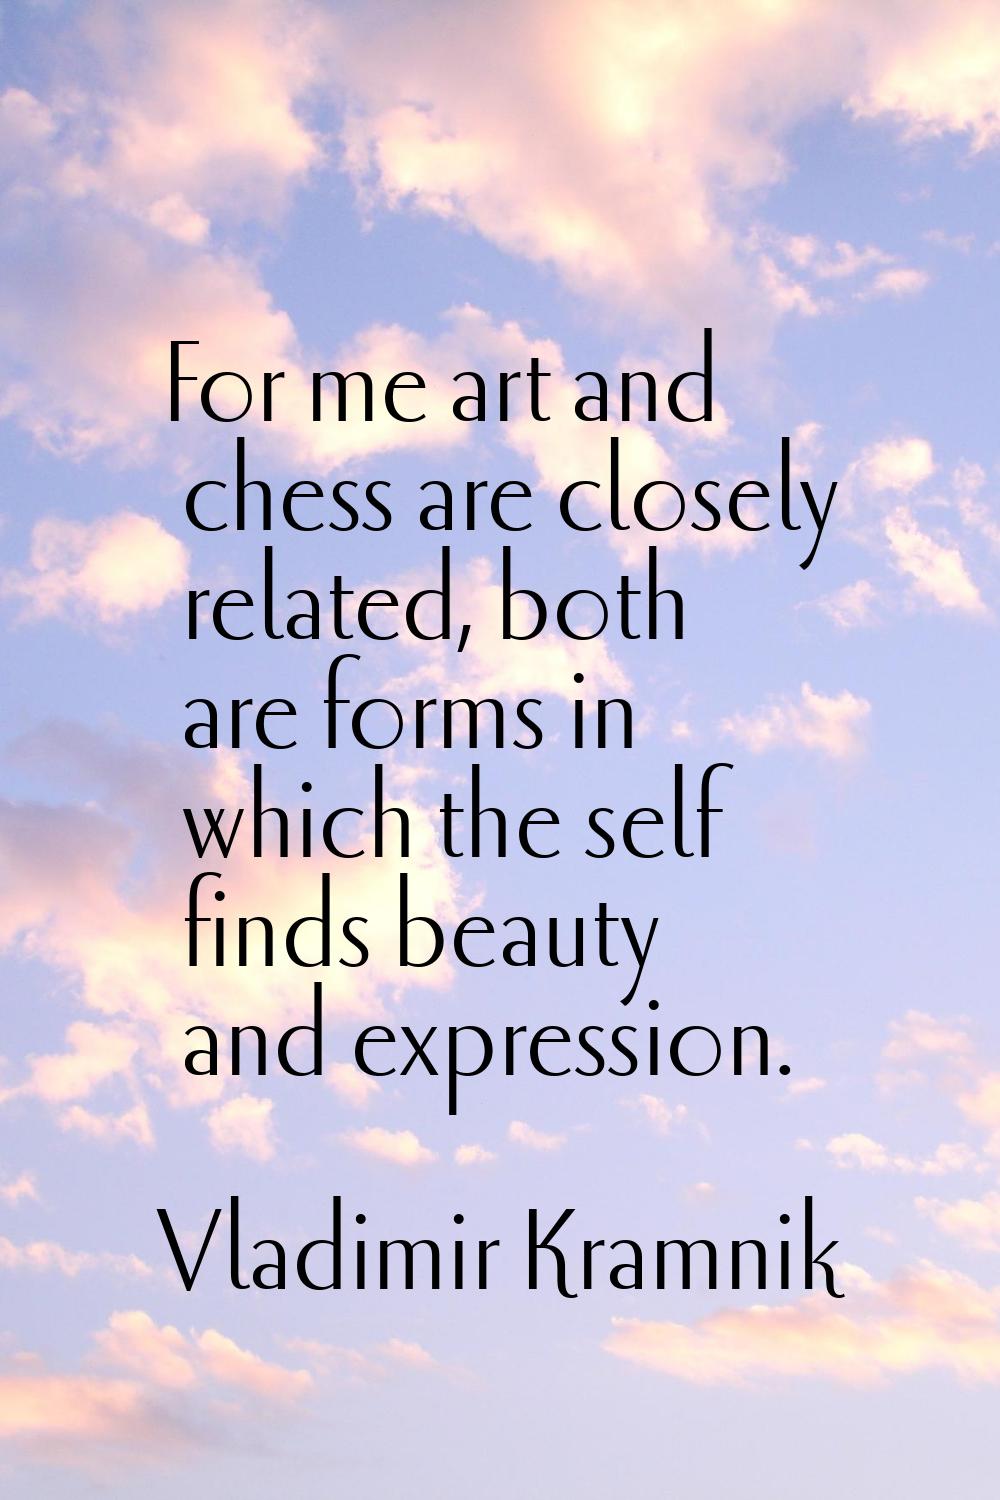 For me art and chess are closely related, both are forms in which the self finds beauty and express